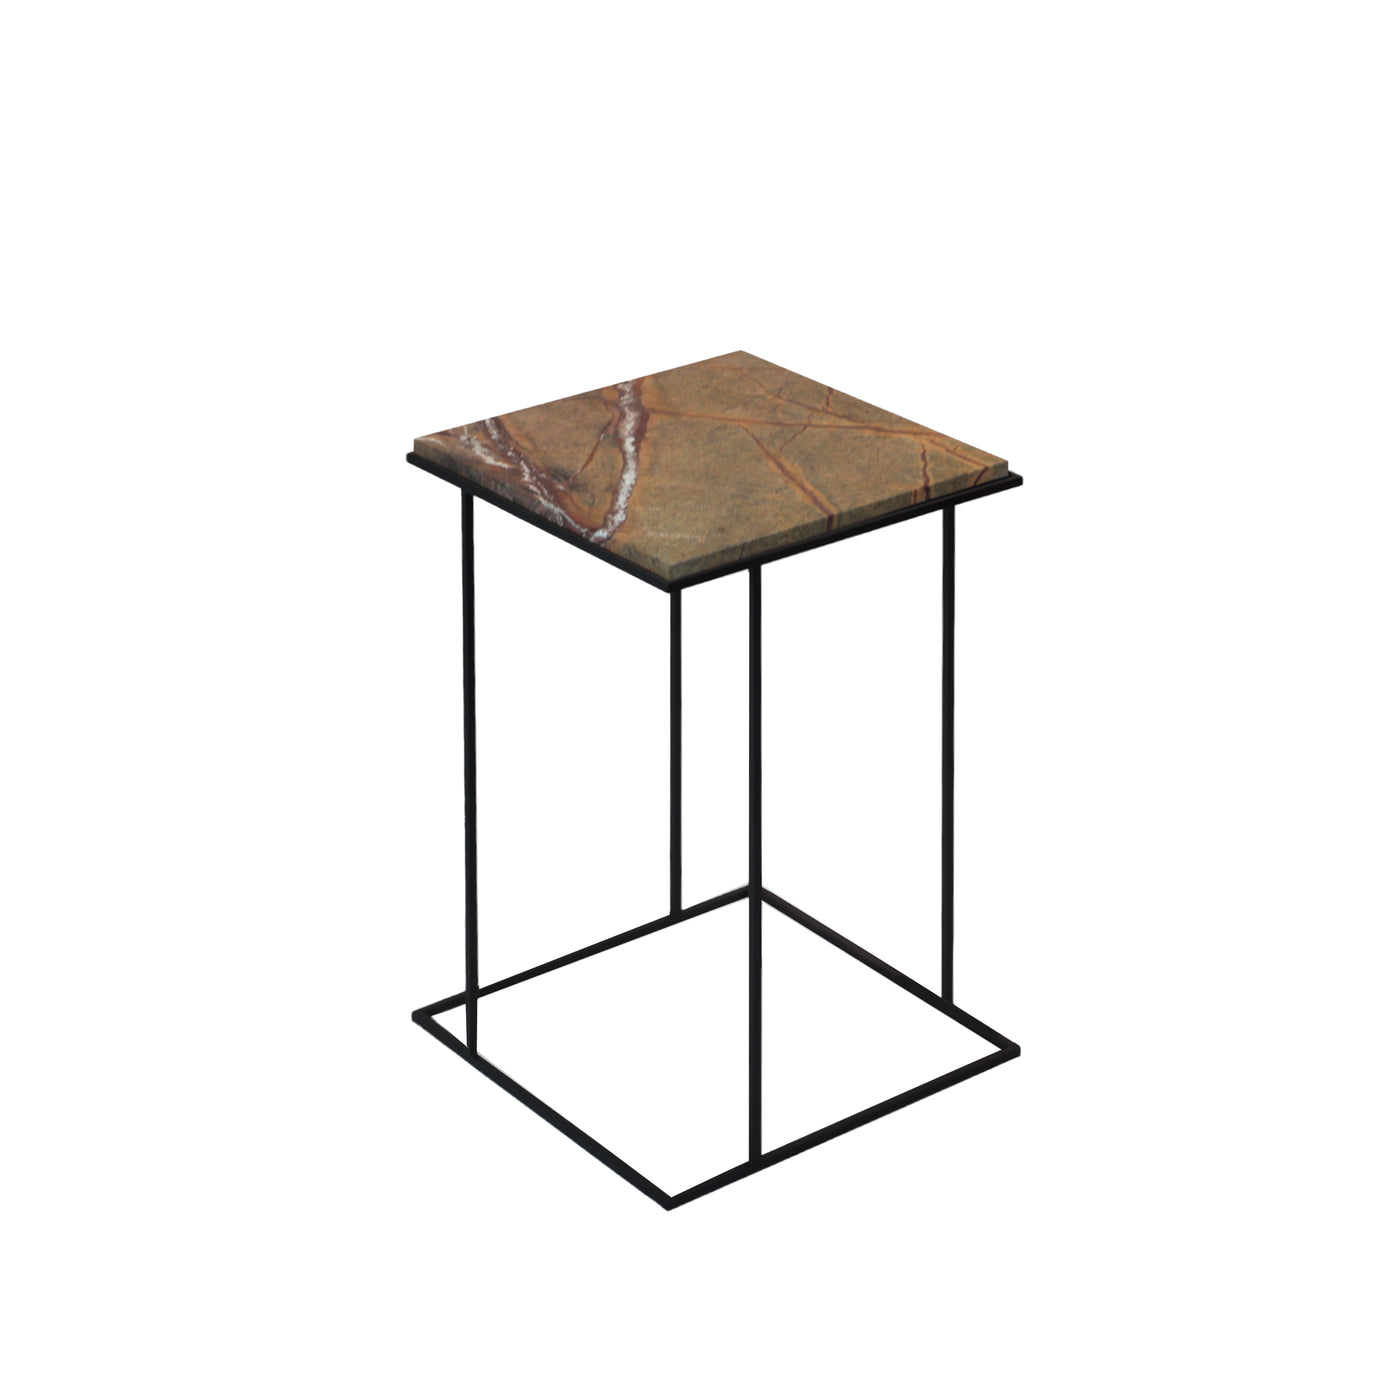 Stone Side Table FRAME by Nicola Di Froscia for DFdesignLab 07